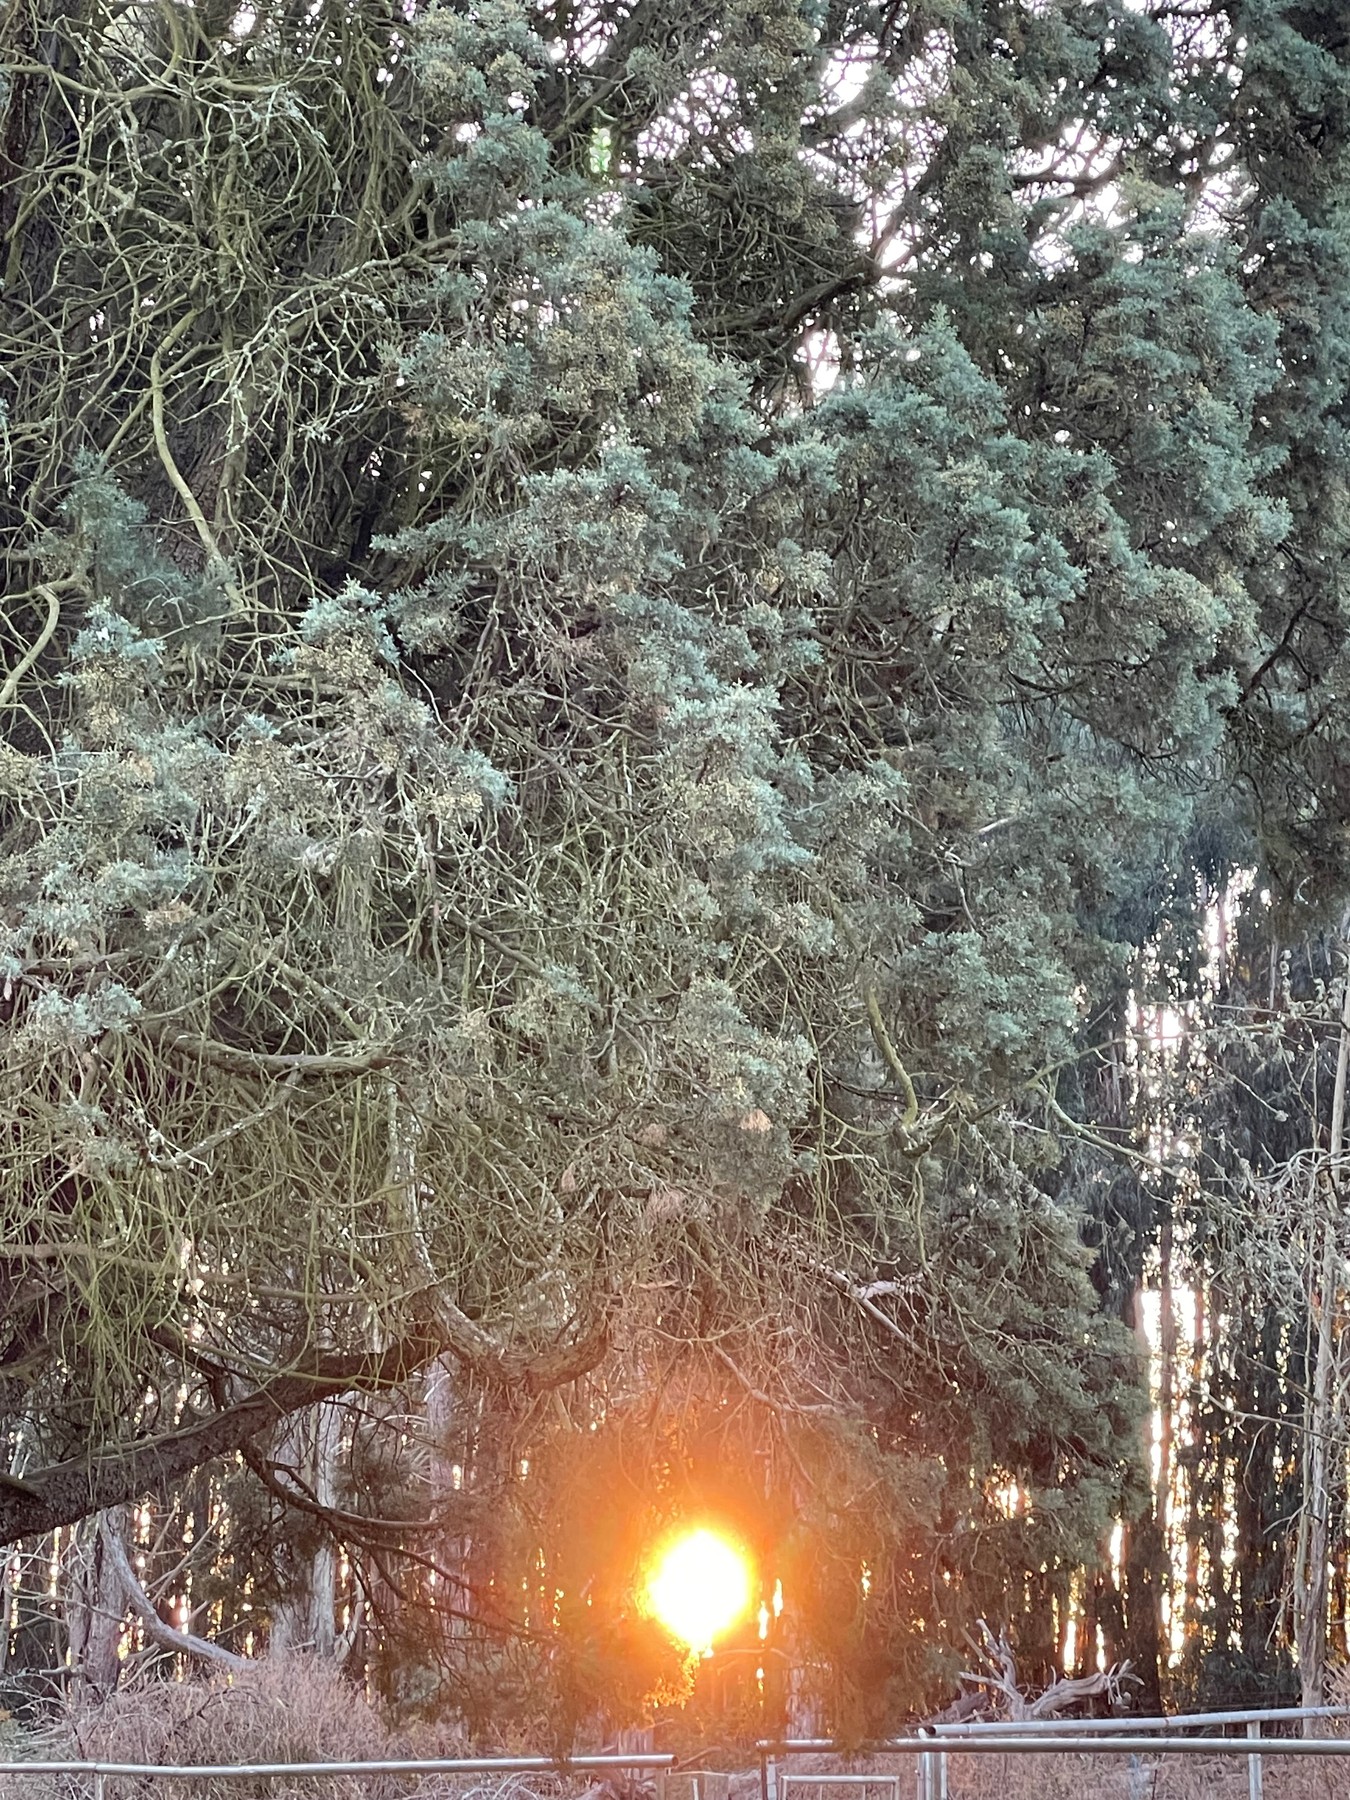 Orb of Sun, Thicket of Trees